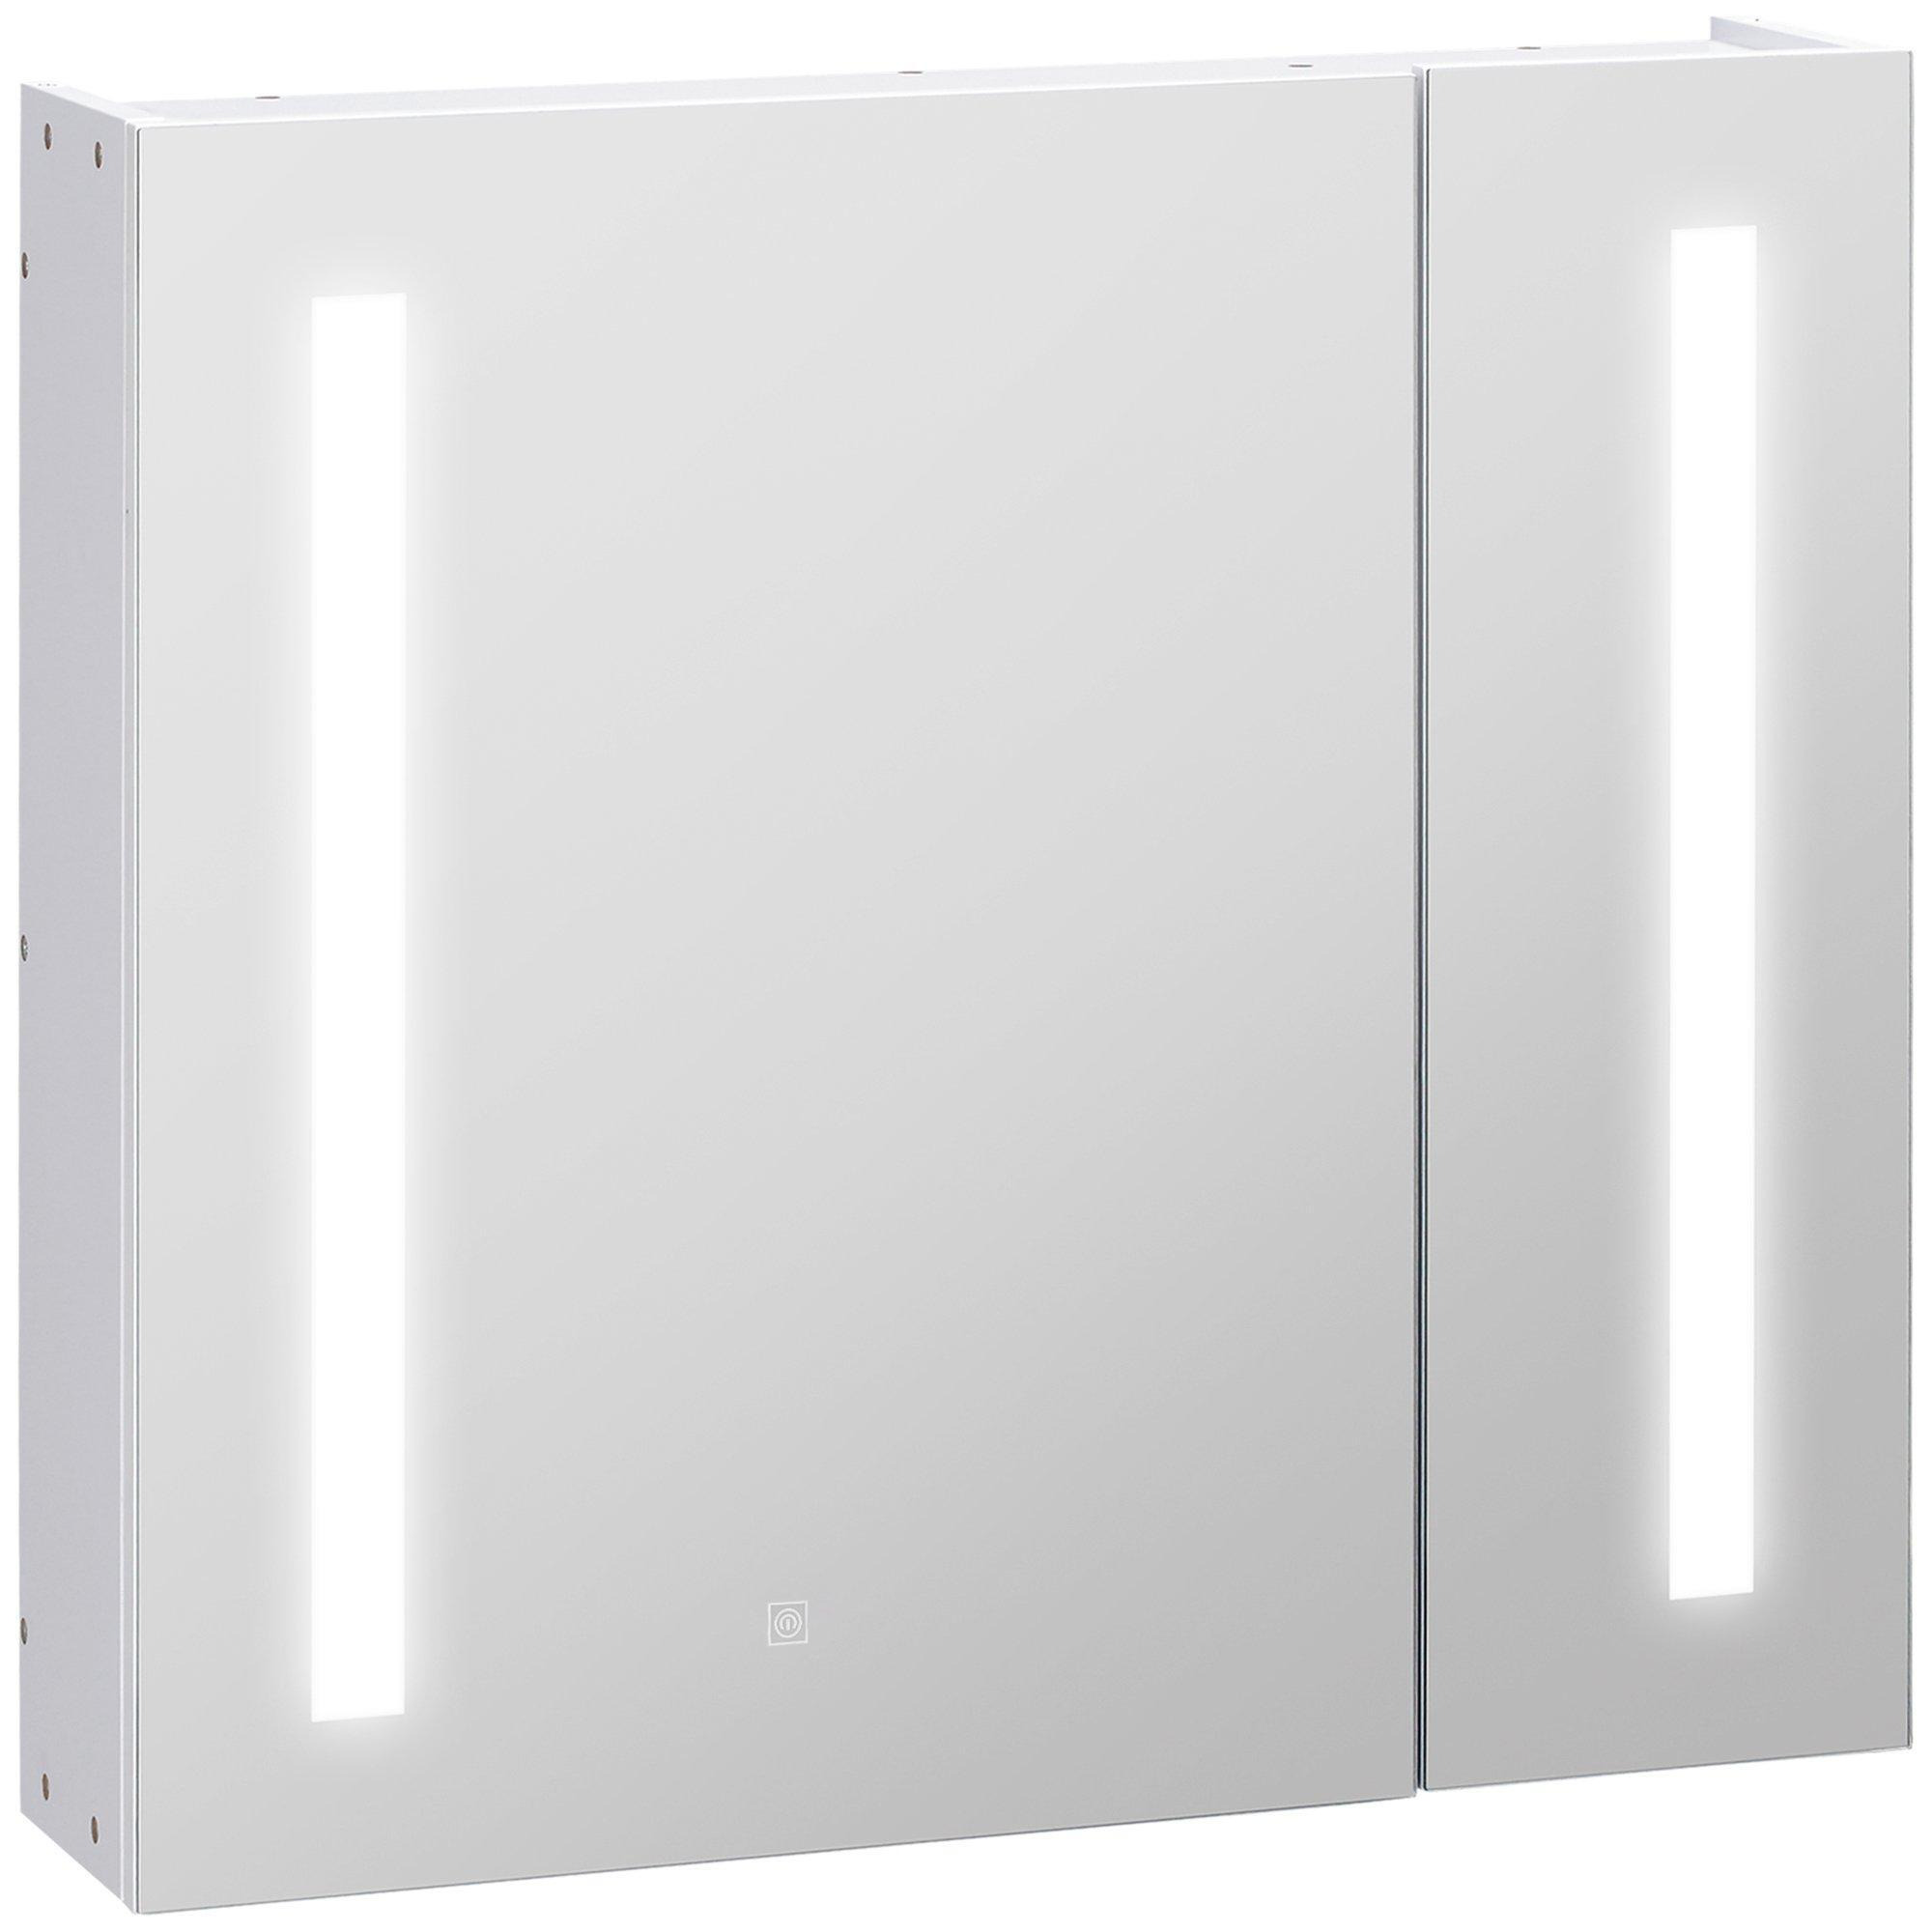 LED Illuminated Bathroom Mirror Cabinet with Lights Touch Switch - image 1